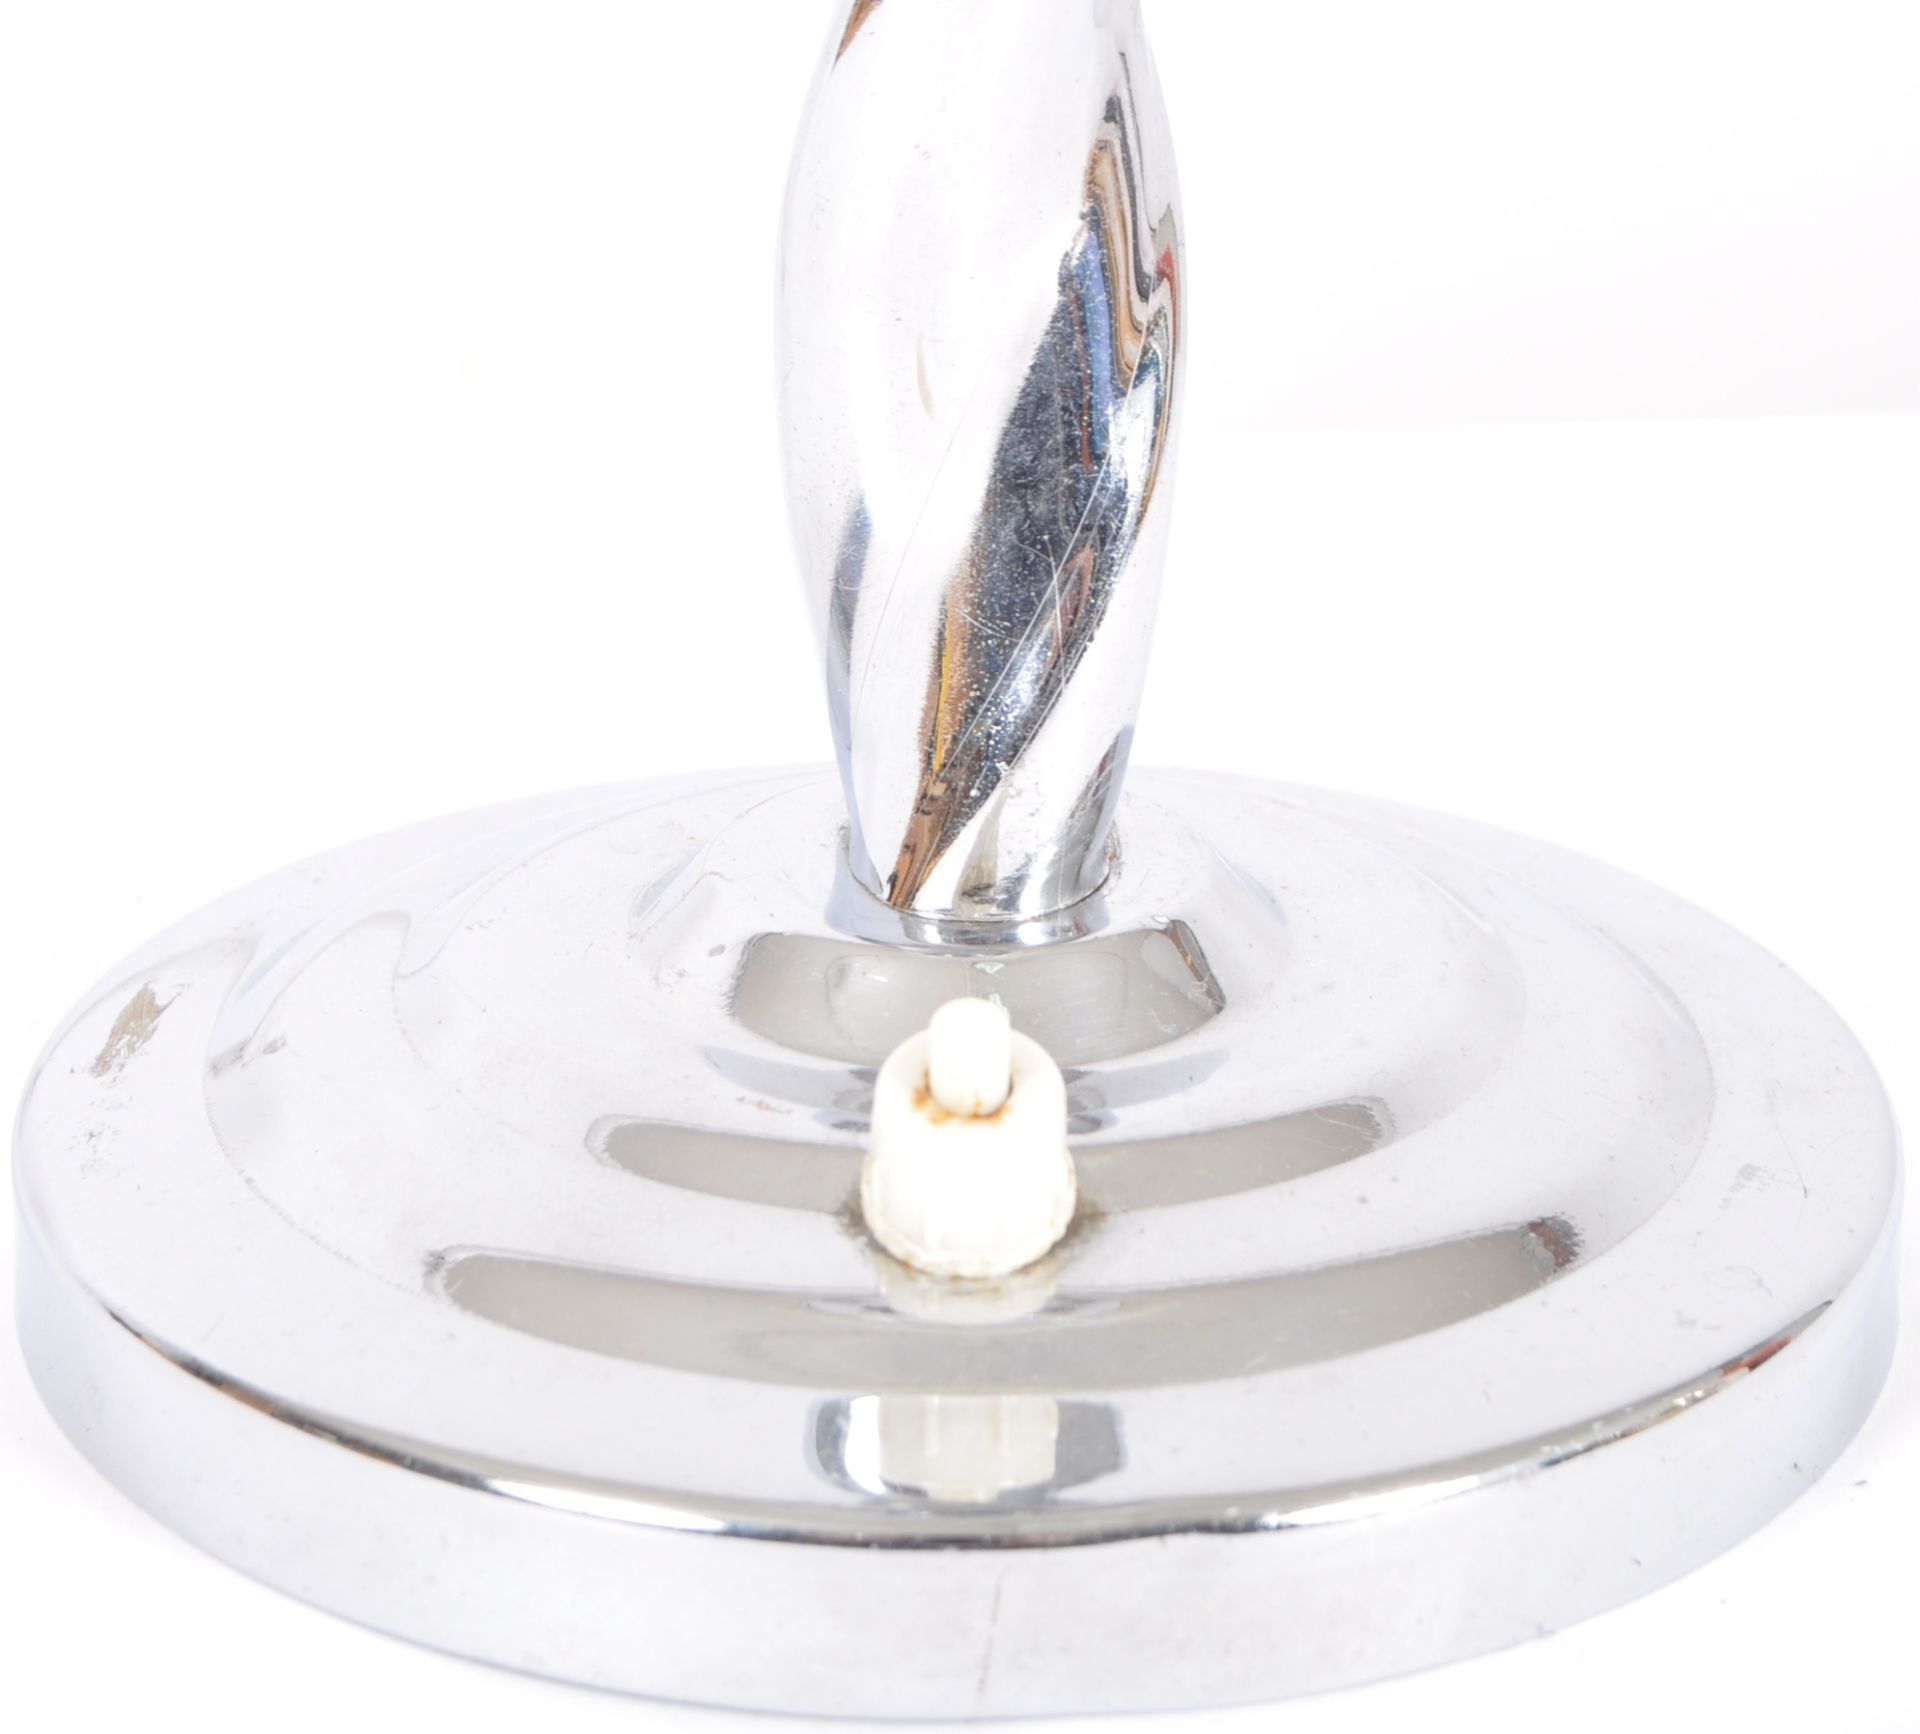 20TH CENTURY ART DECO CHROME AND GLASS TABLE LAMP - Image 3 of 9